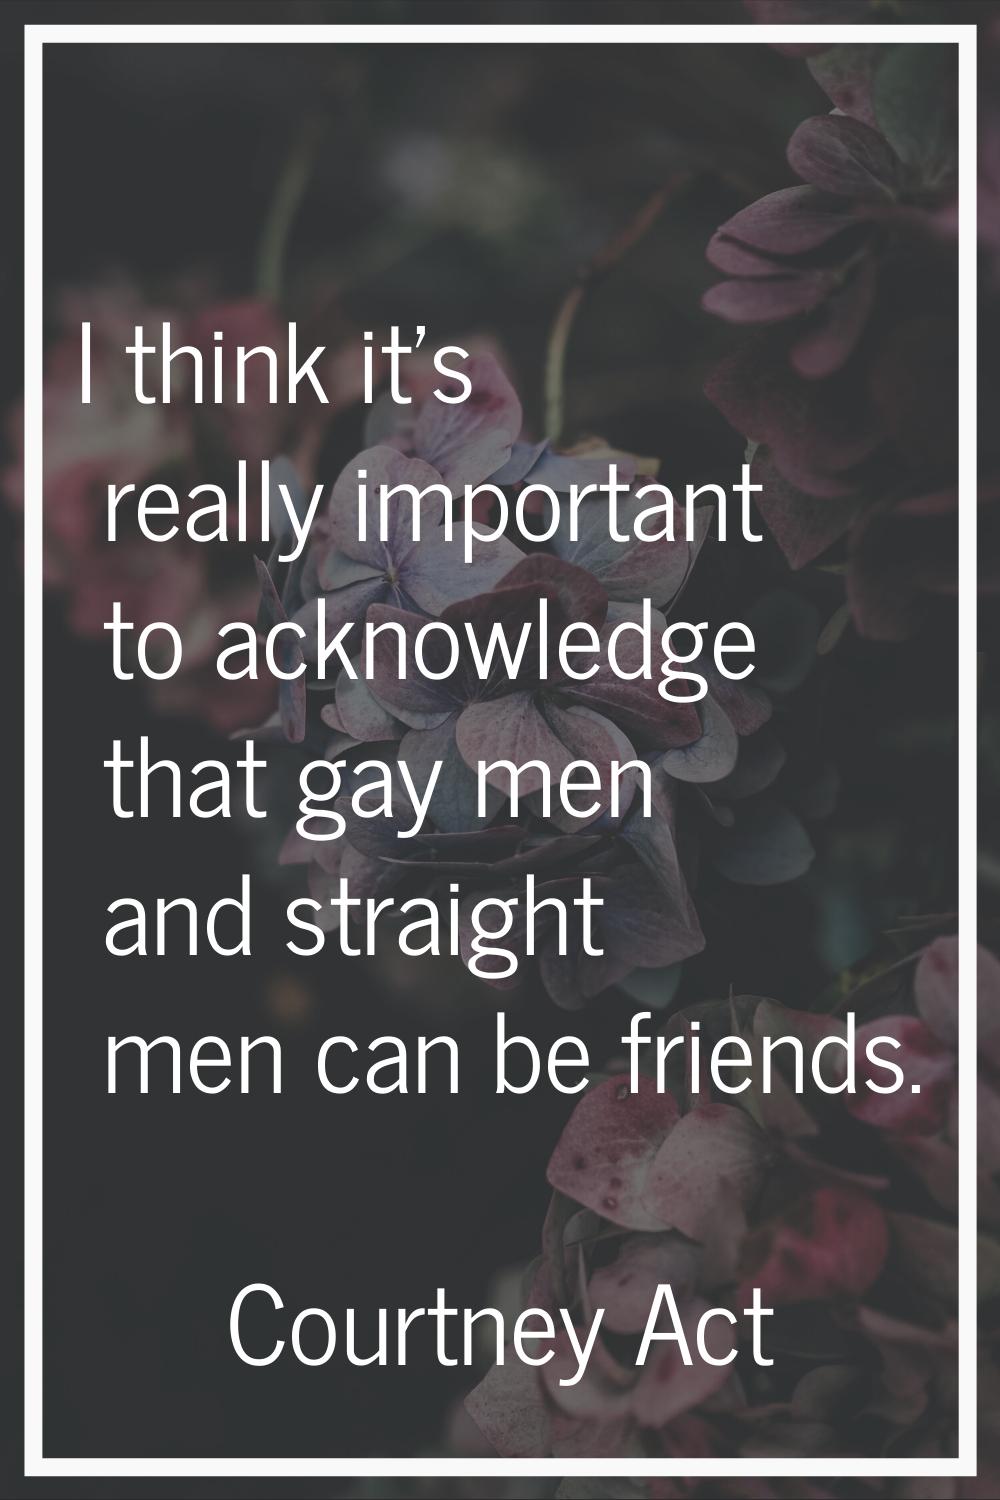 I think it's really important to acknowledge that gay men and straight men can be friends.